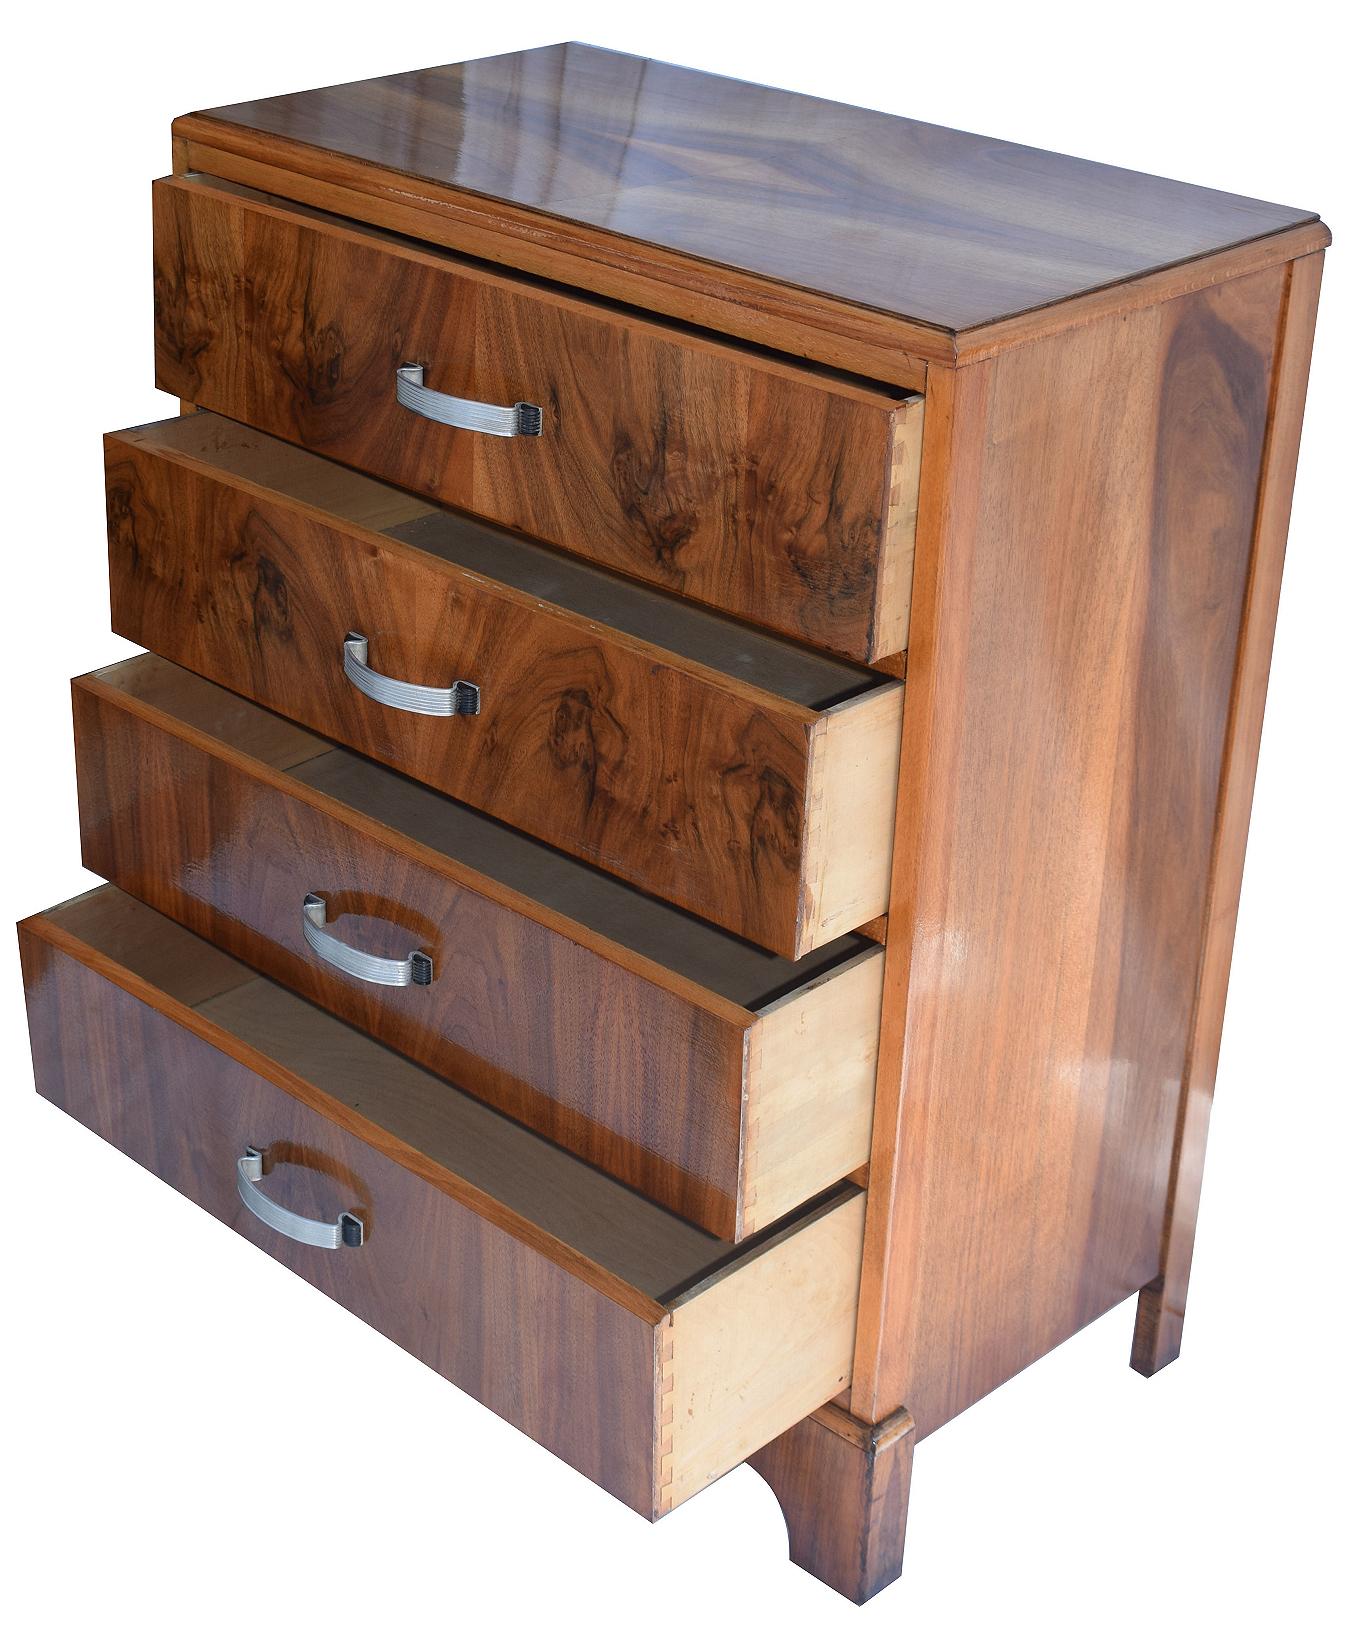 Polished English, 1930s Art Deco Chest of Four Drawers in Figured Walnut